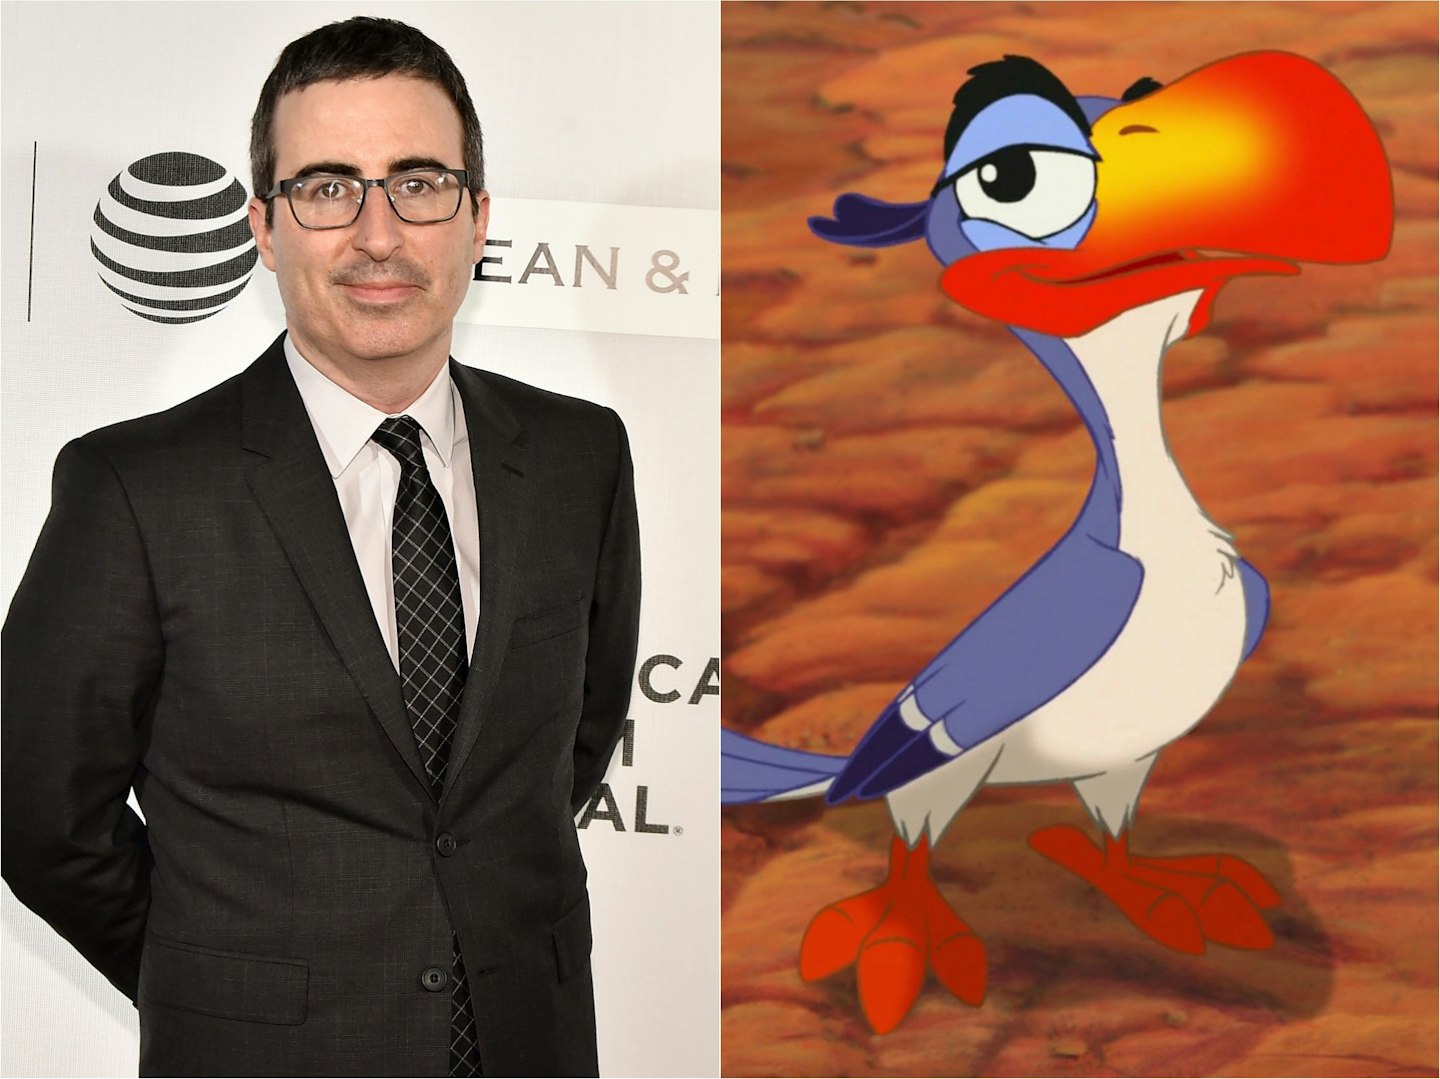 John Oliver and Zazu from The Lion King